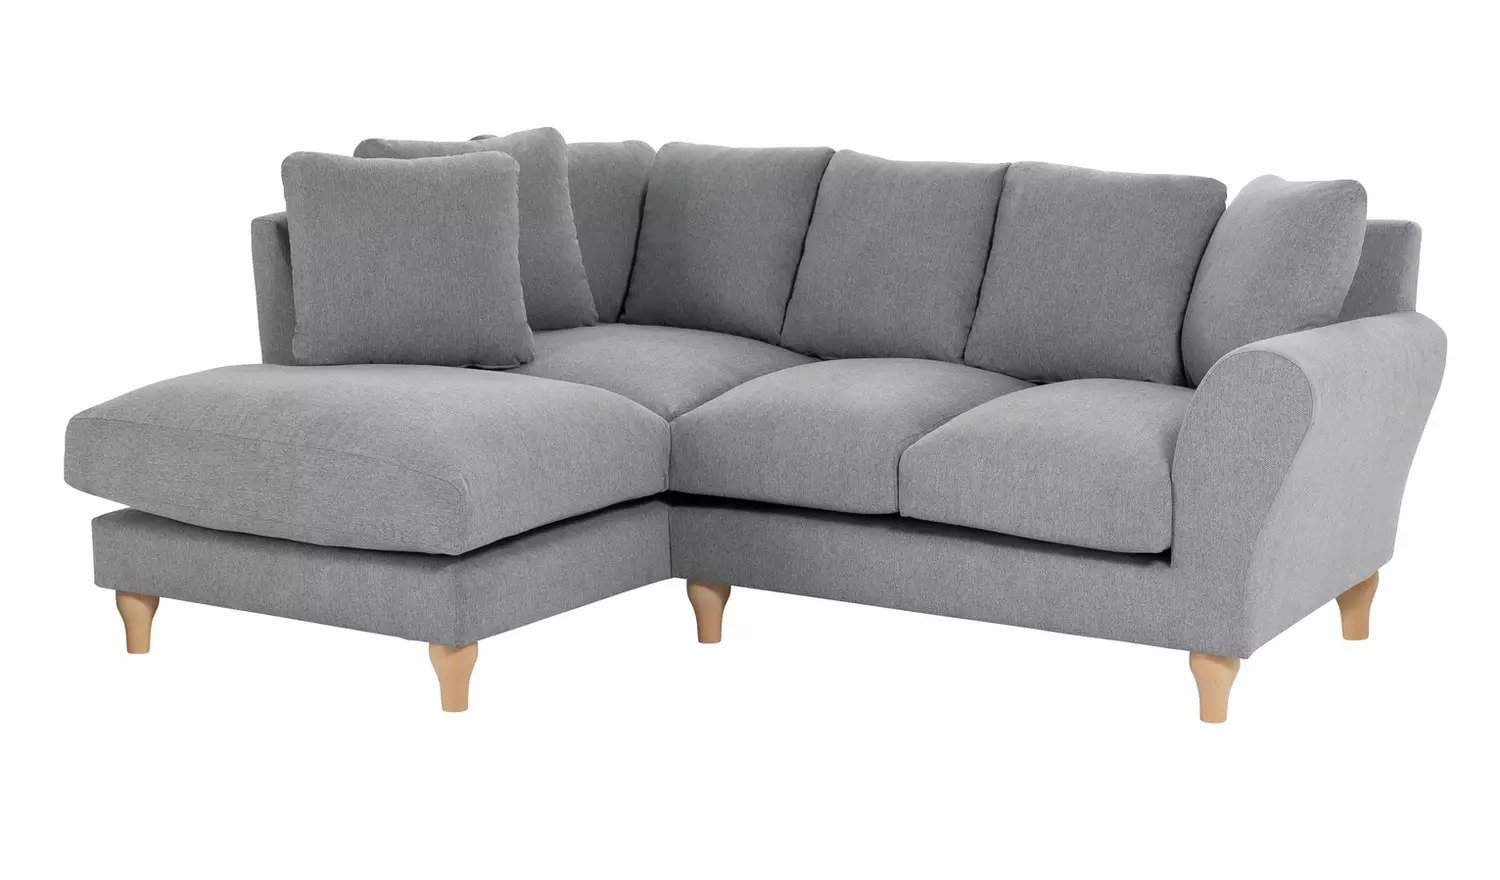 Save £198 on the Carrie Corner Sofa from Habitat